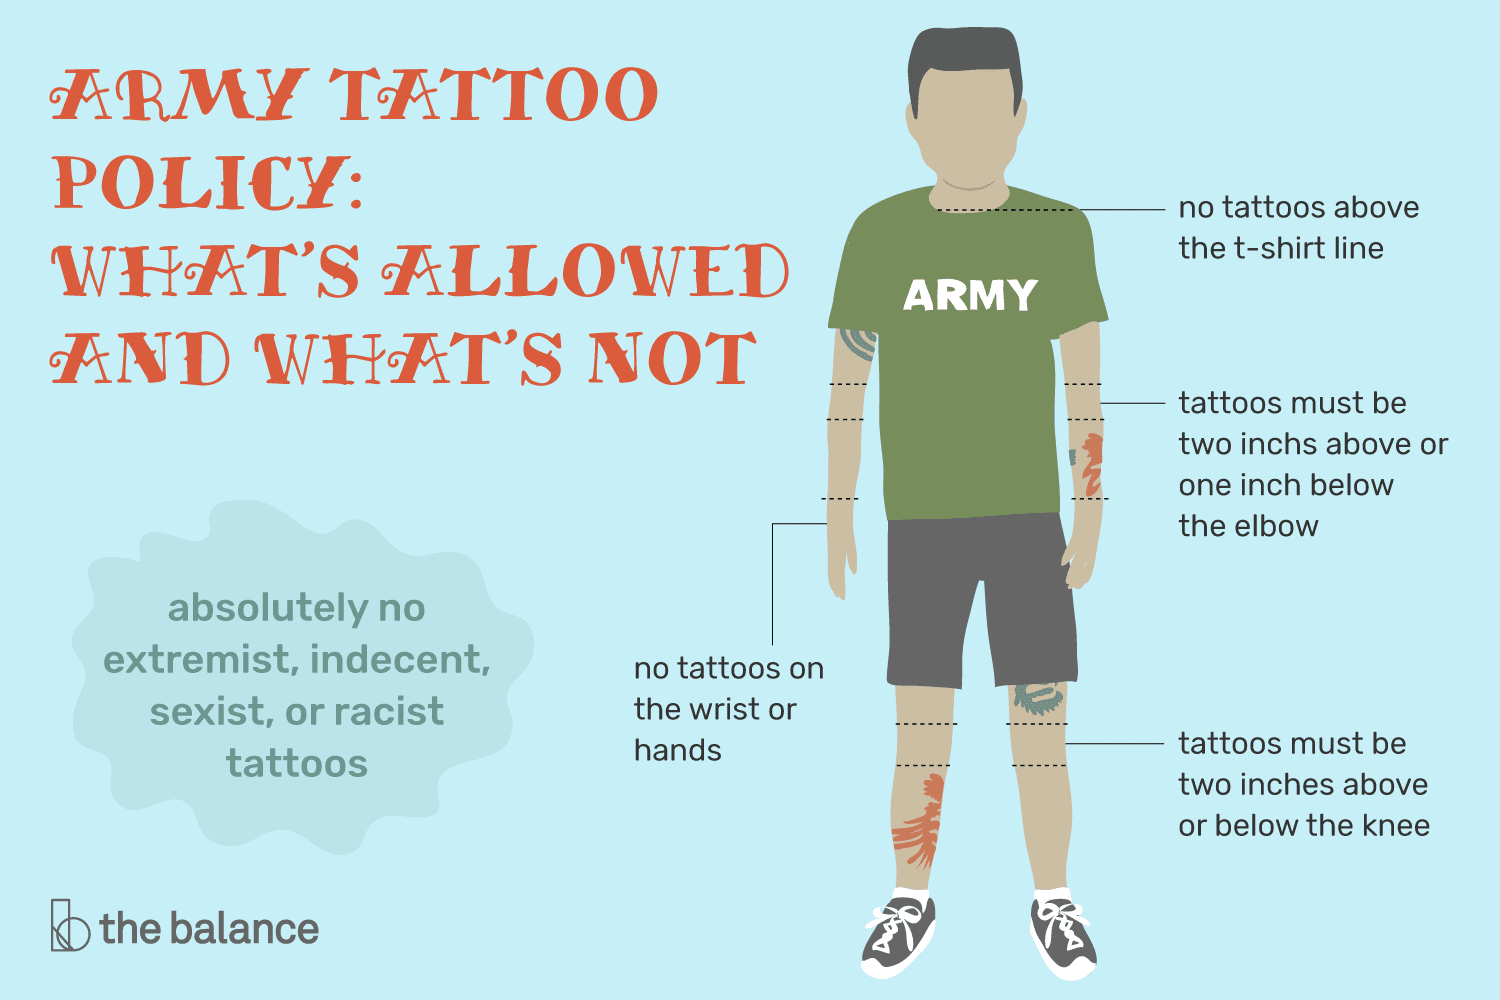 Army Tattoo Policy: What